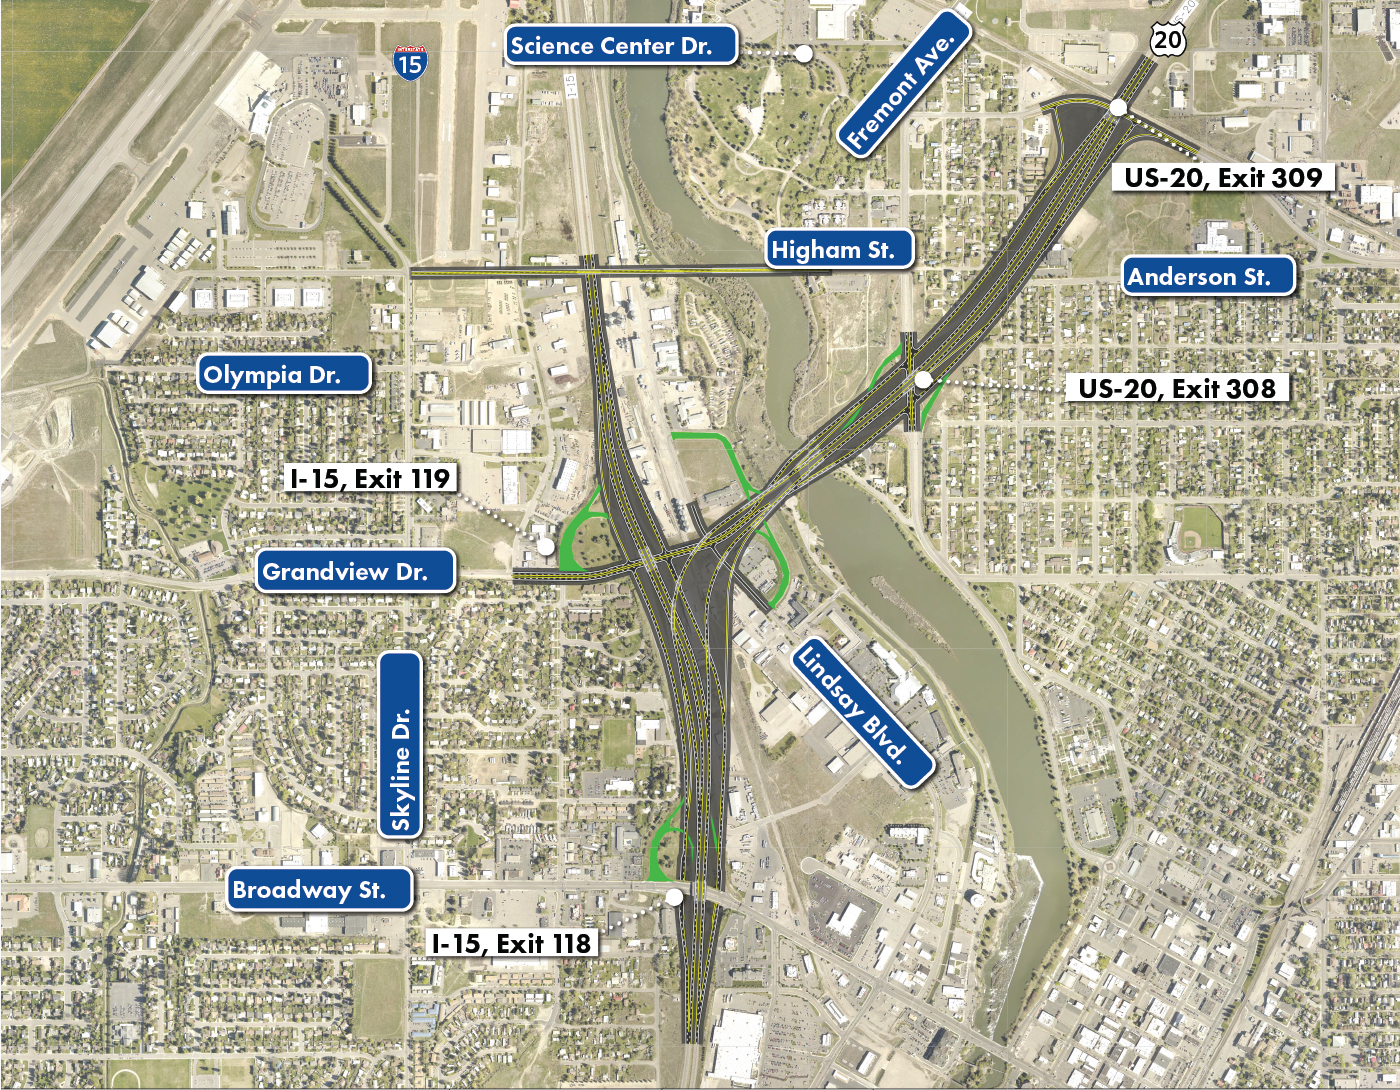 Alternative C3 Aerial map includes Roadways, Structures, and Roadway Obliterations. It also includes 9 highlighted roads: from south to north they are Science Center Drive, Fremont Ave., Hgham St., Anderson St., Olympia Dr., Grandview Dr., Skyline Fr., Lindsay Blvd., and Broadway St. I-15, Exit 118 and US-20, Exit 308 and 309 are also called out. The Alternative area is featured with the notations of the roadway obliterations.